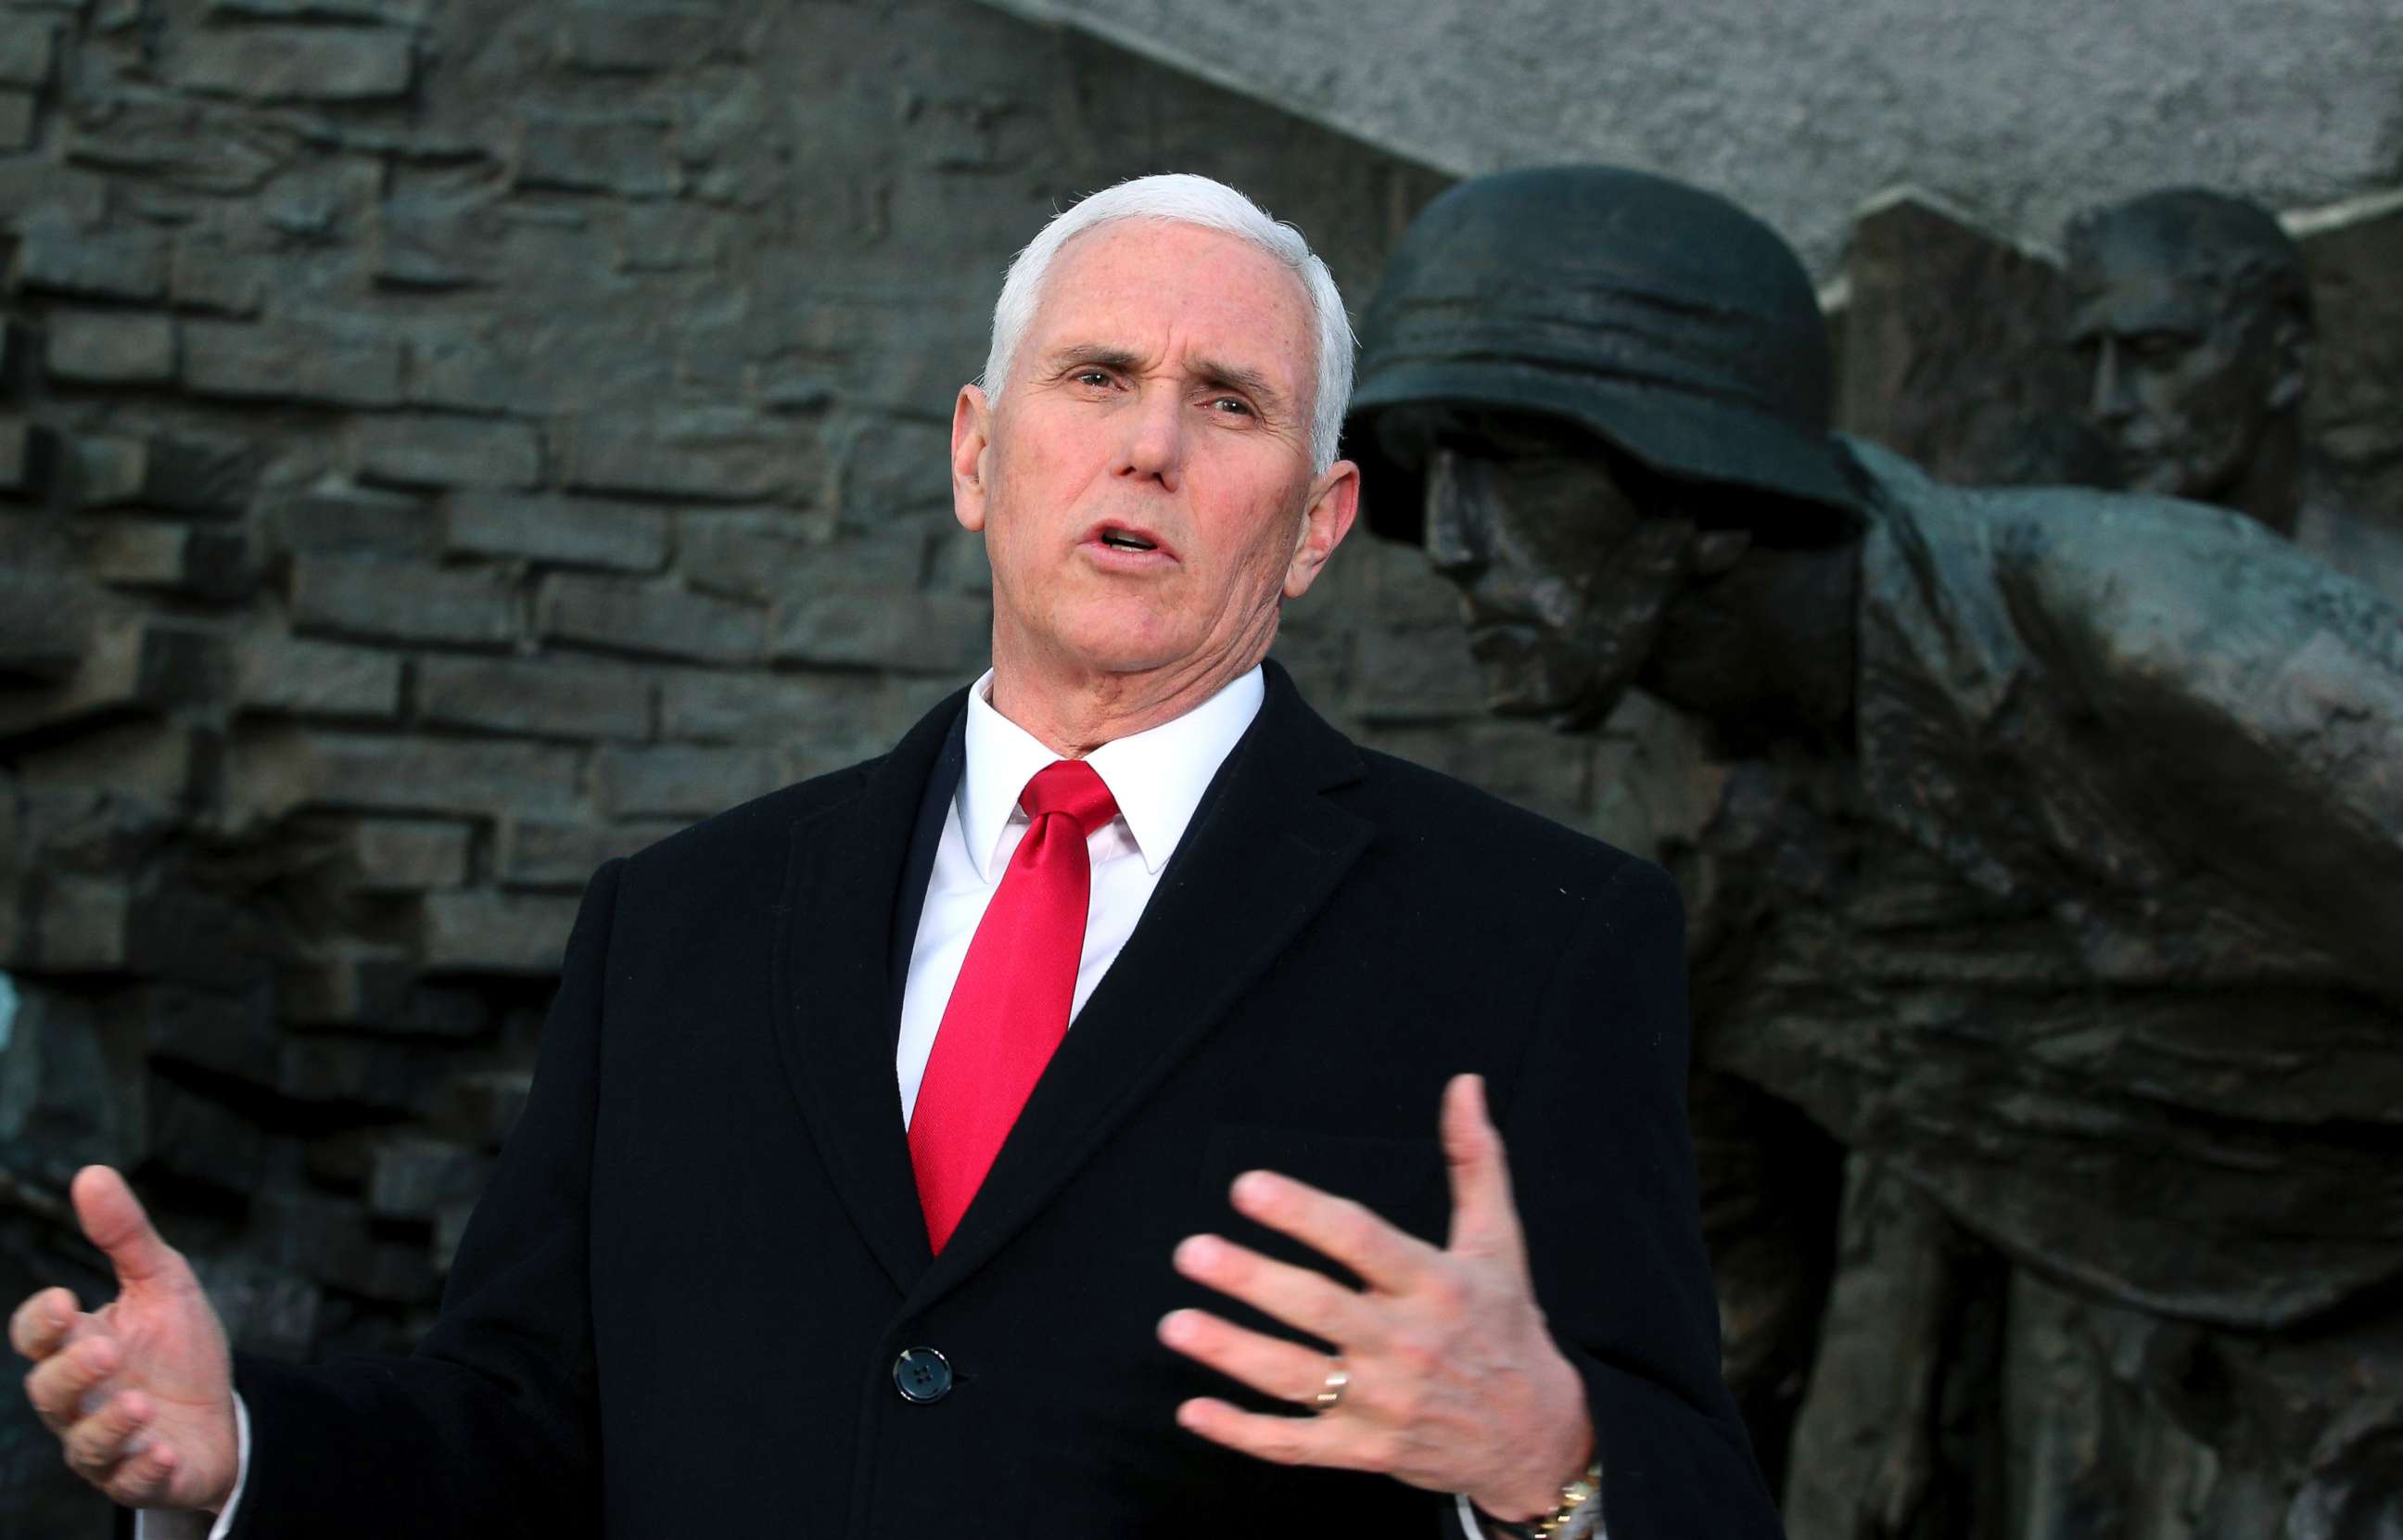 PHOTO: United States Vice President Mike Pence speaks during a statement in front of the 'Warsaw Uprising Monument' in Warsaw, Poland, Feb. 14, 2019.